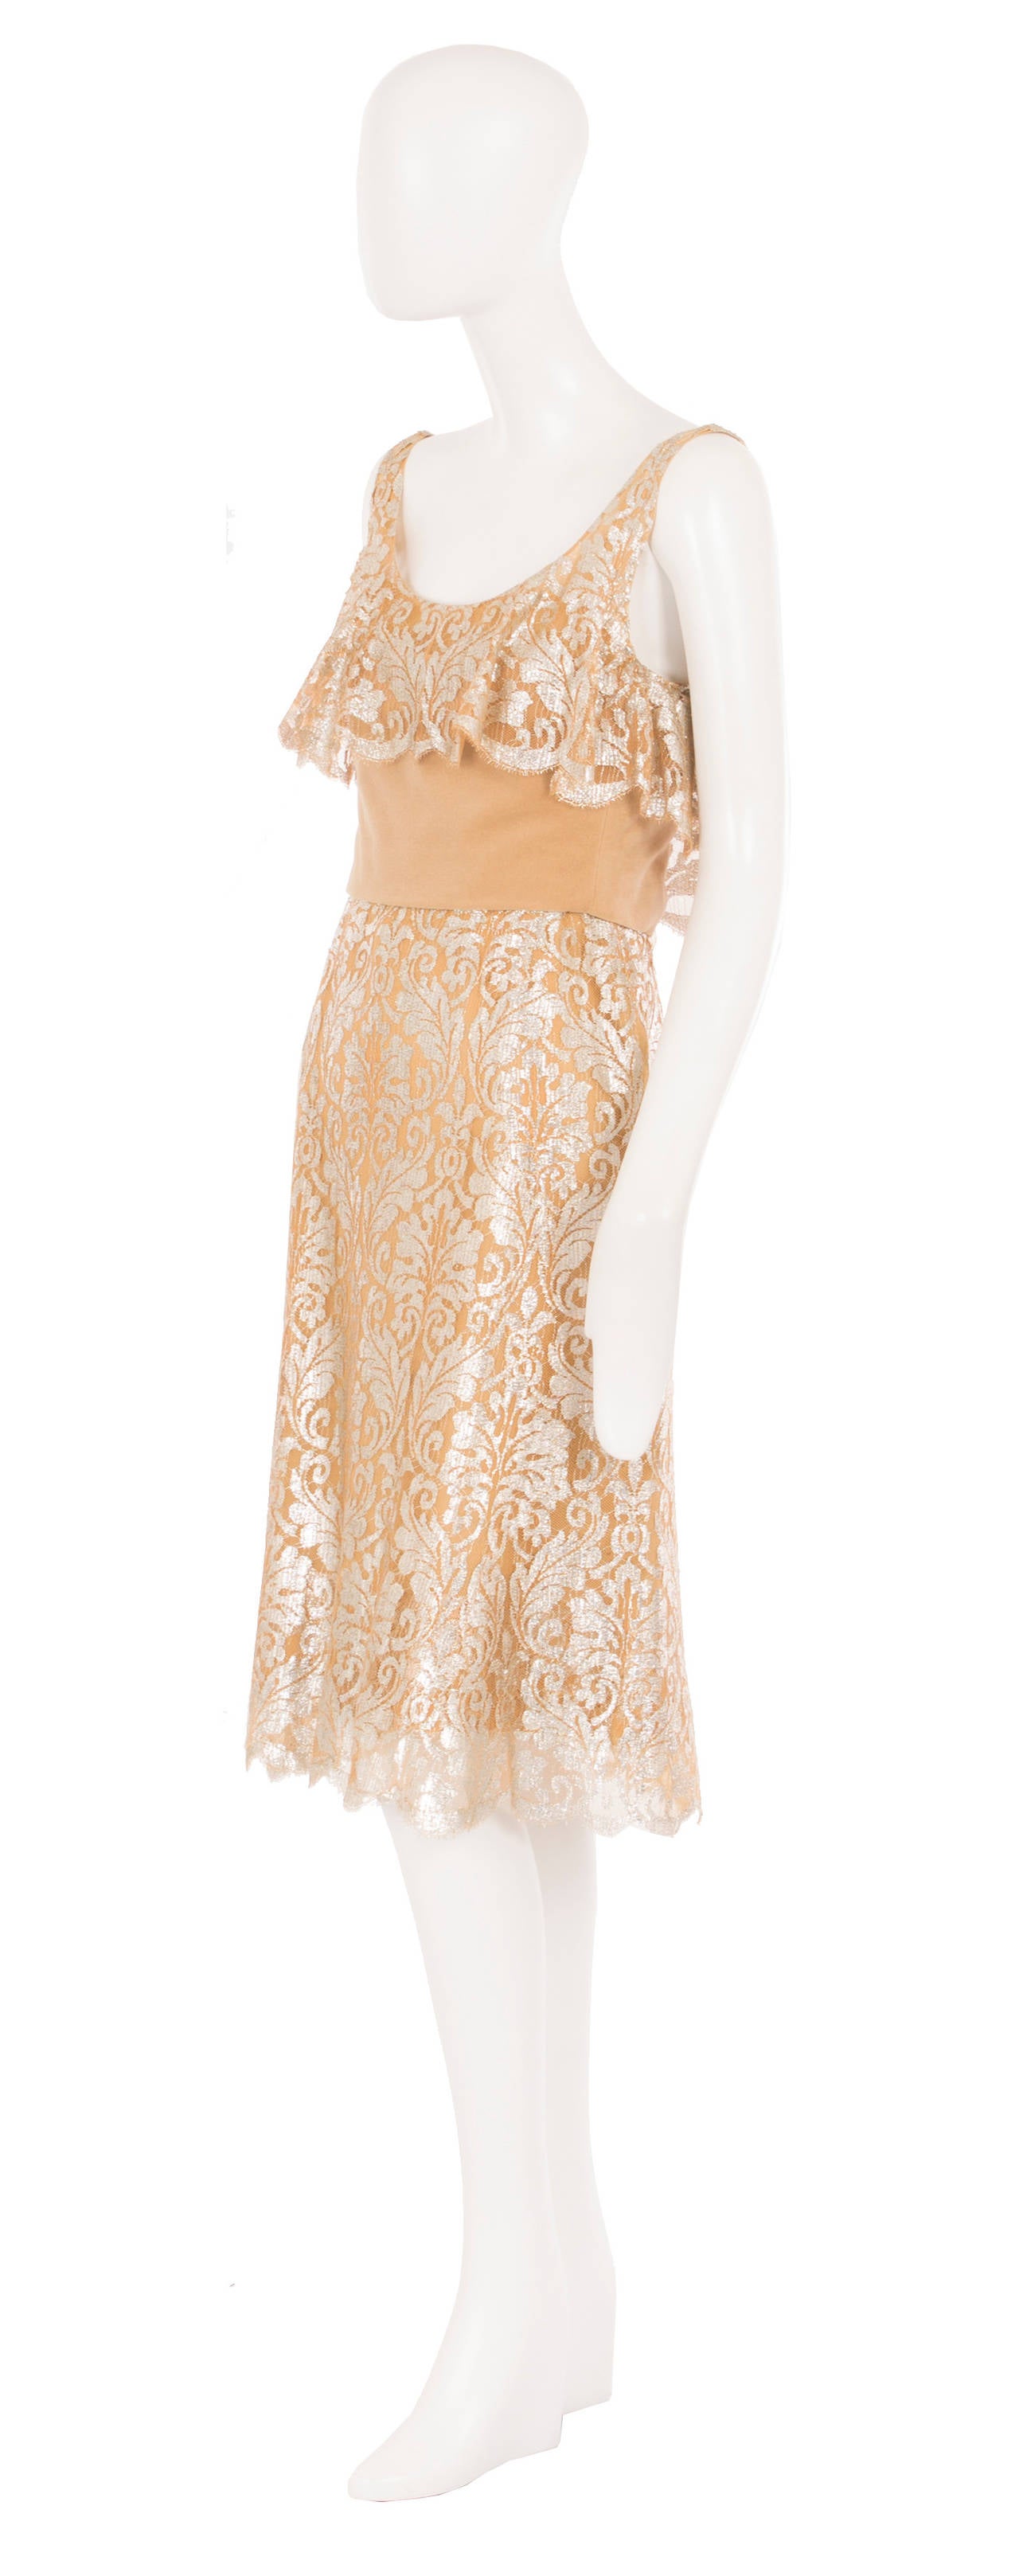 This exquisite piece of haute couture is the epitome of chic and a superb example of Marc Bohan’s early years at the house of Dior. Constructed in caramel-coloured lace shot through with silver lurex, the dress features a ruffle details over the